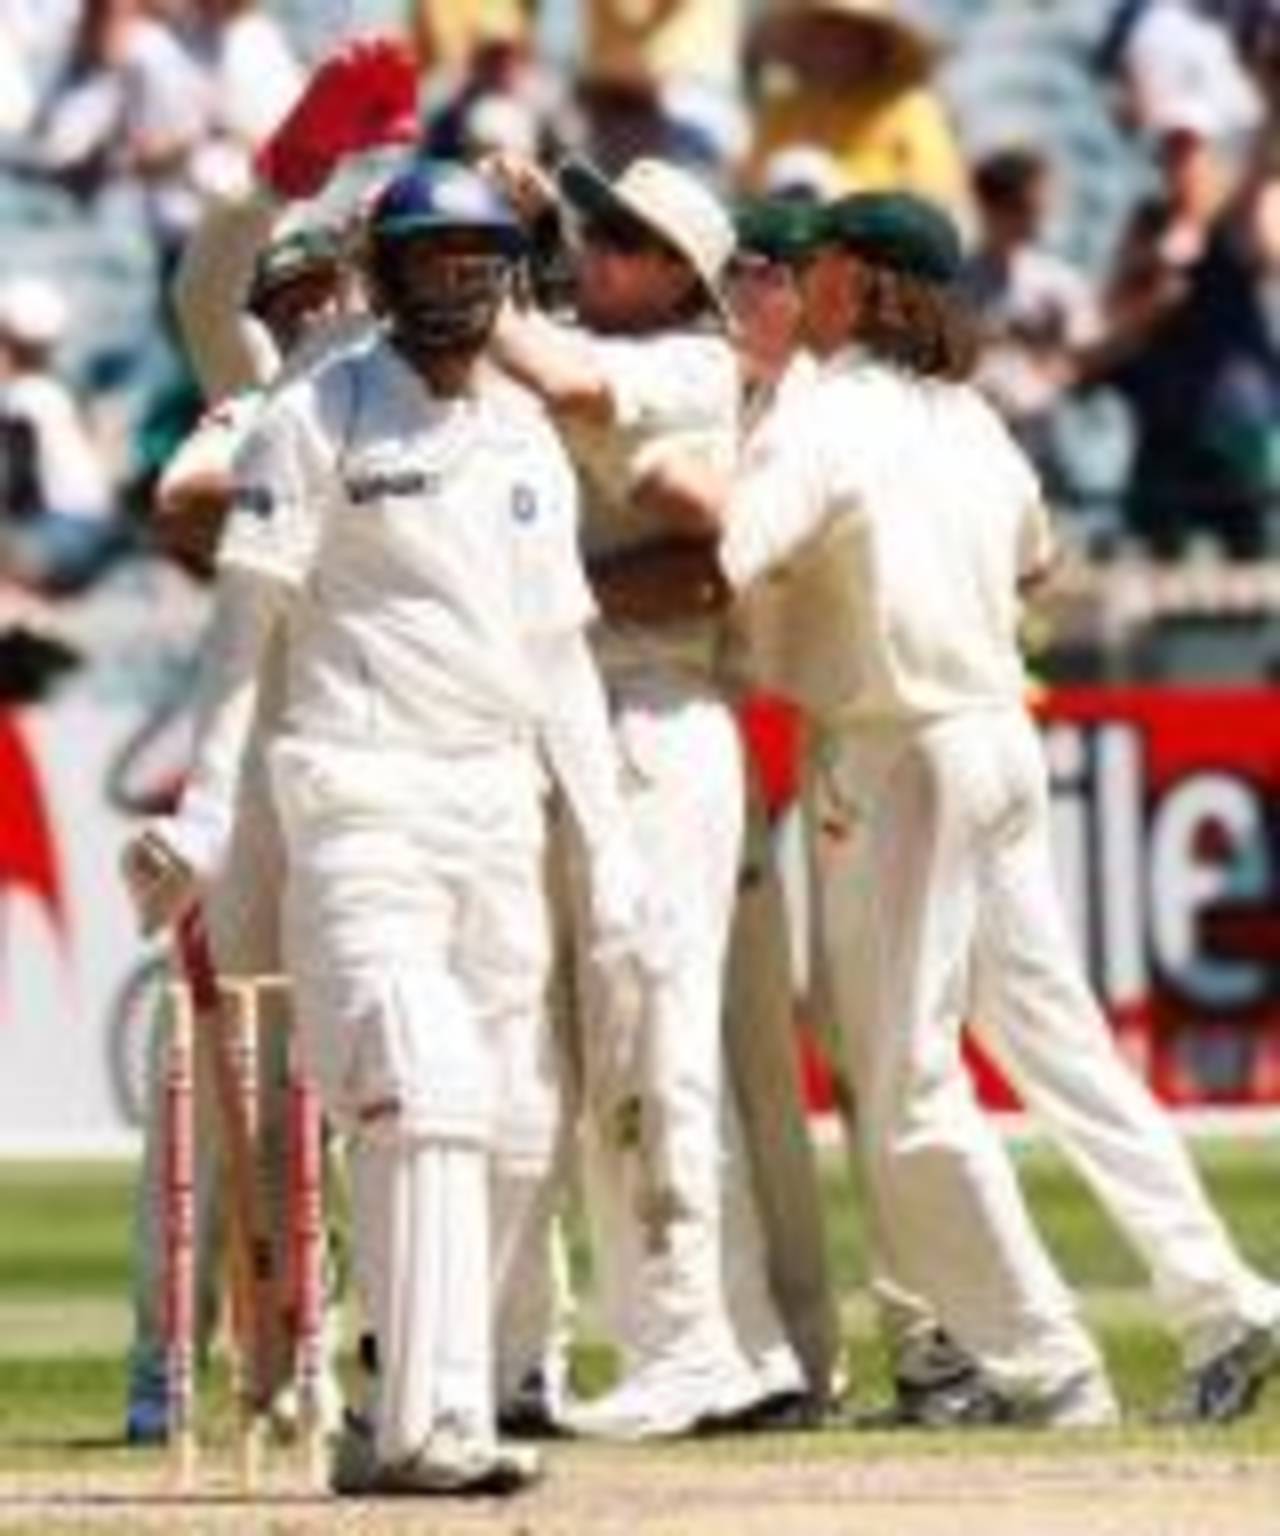 Yuvraj Singh is stunned after being given out caught behind, Australia v India, 1st Test, Melbourne, 2nd day, December 27, 2007